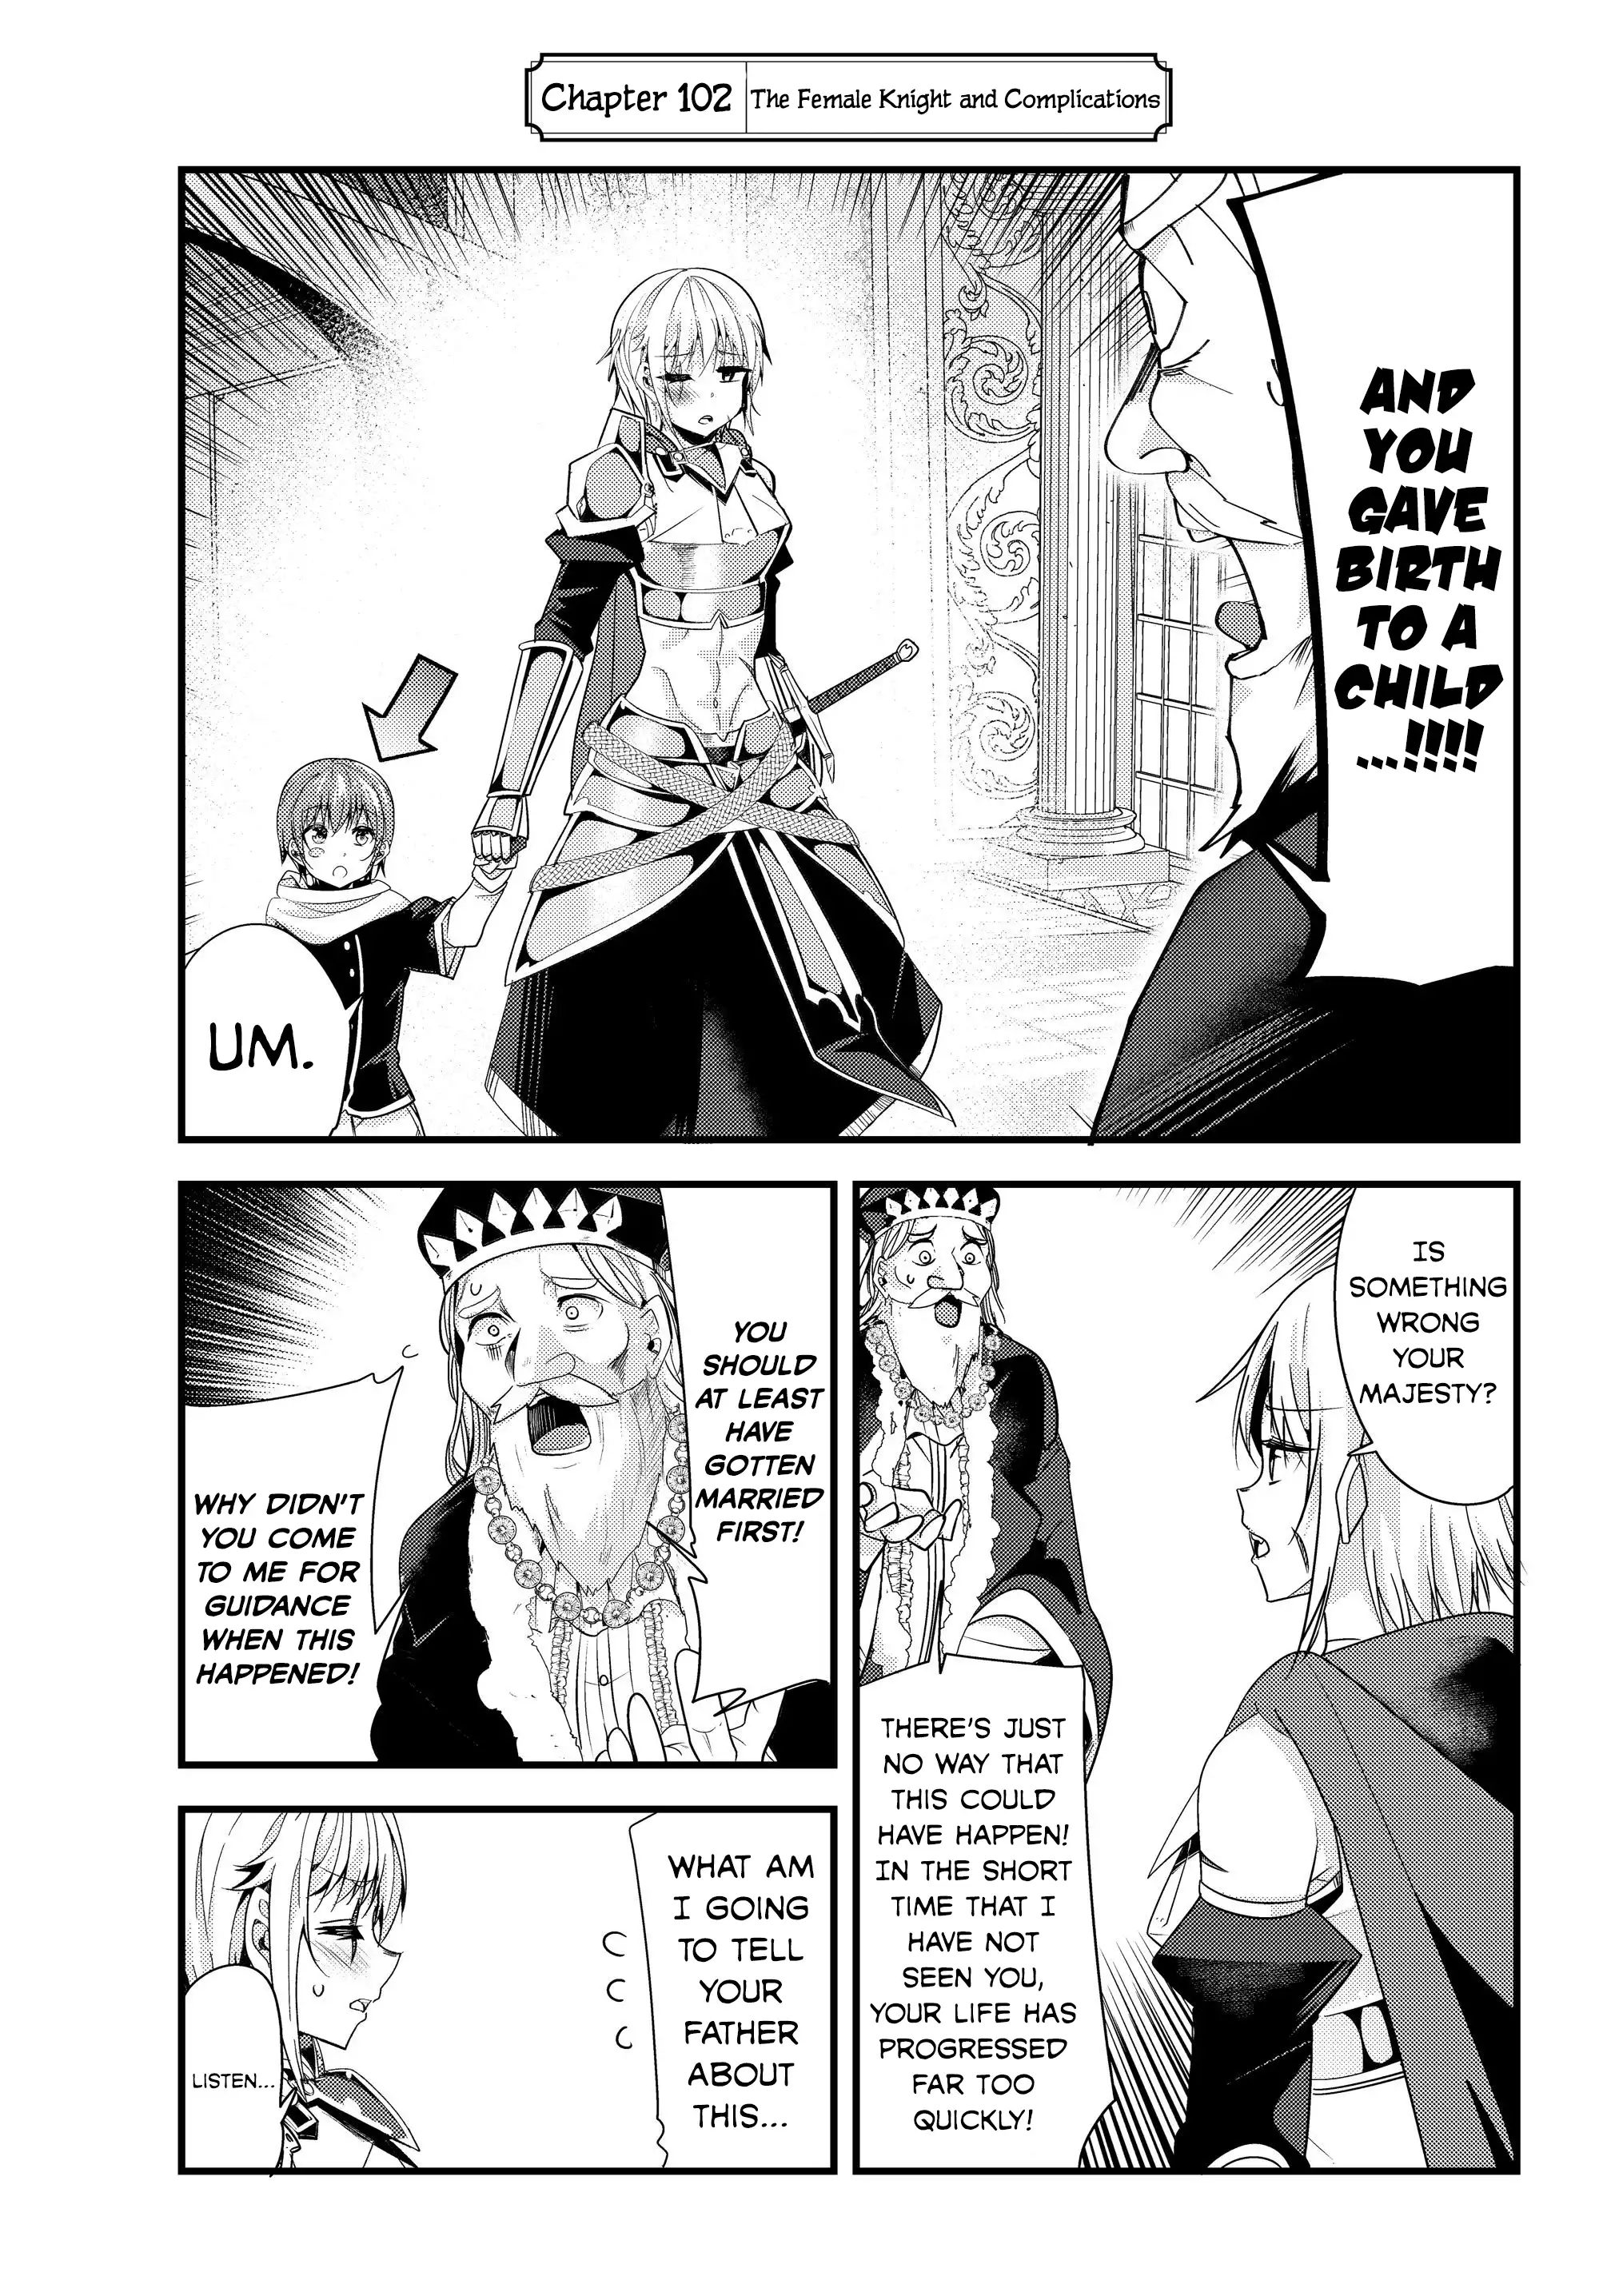 A Story About Treating a Female Knight, Who Has Never Been Treated as a Woman, as a Woman - Chapter 102 Page 3